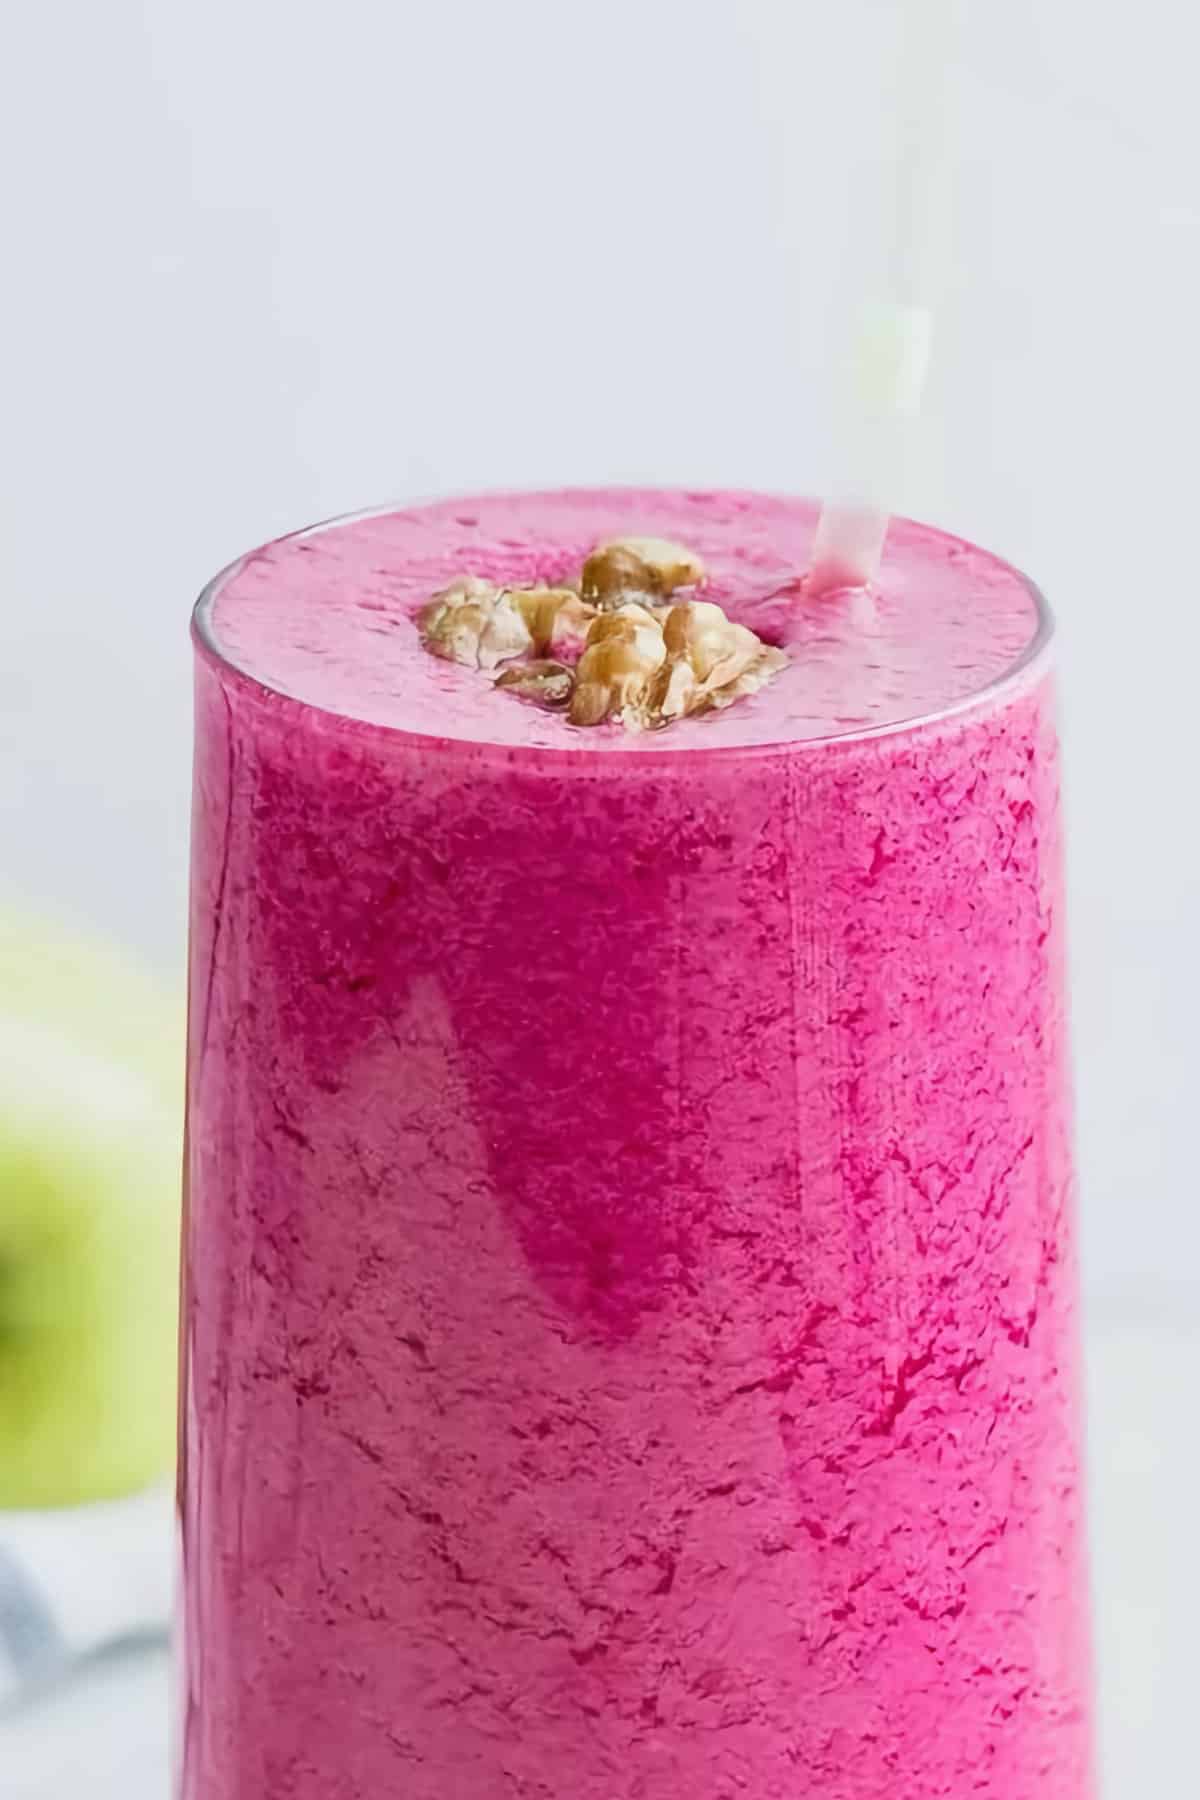 Simply Great Detox Smoothie